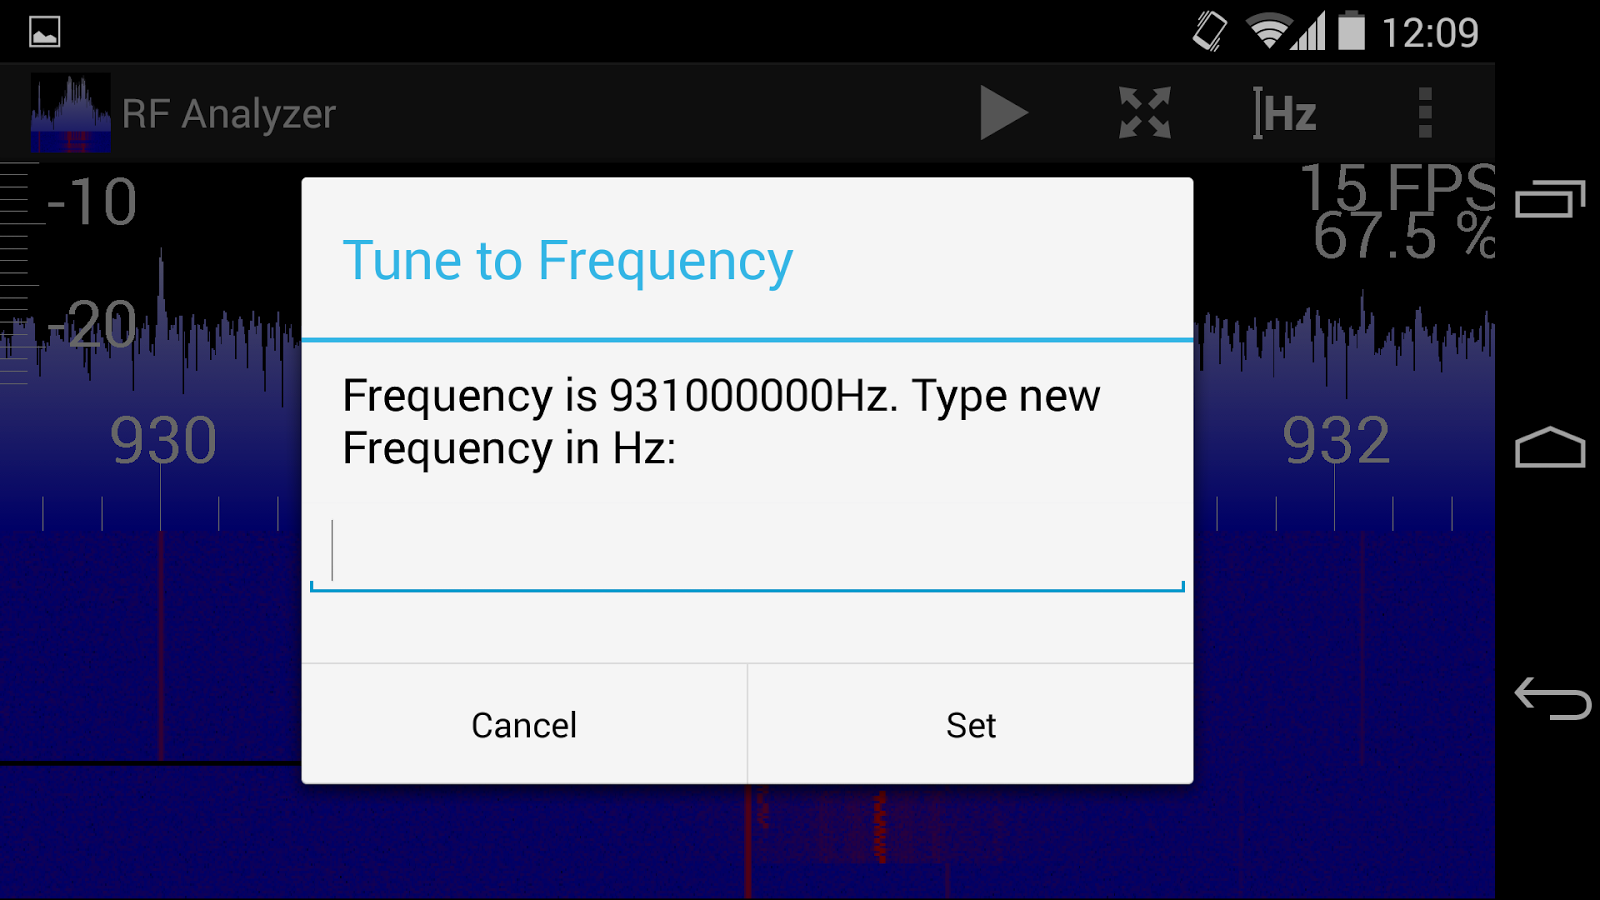 Mantz Tech Rf Analyzer Explore The Frequency Spectrum With The Hackrf On An Android Device